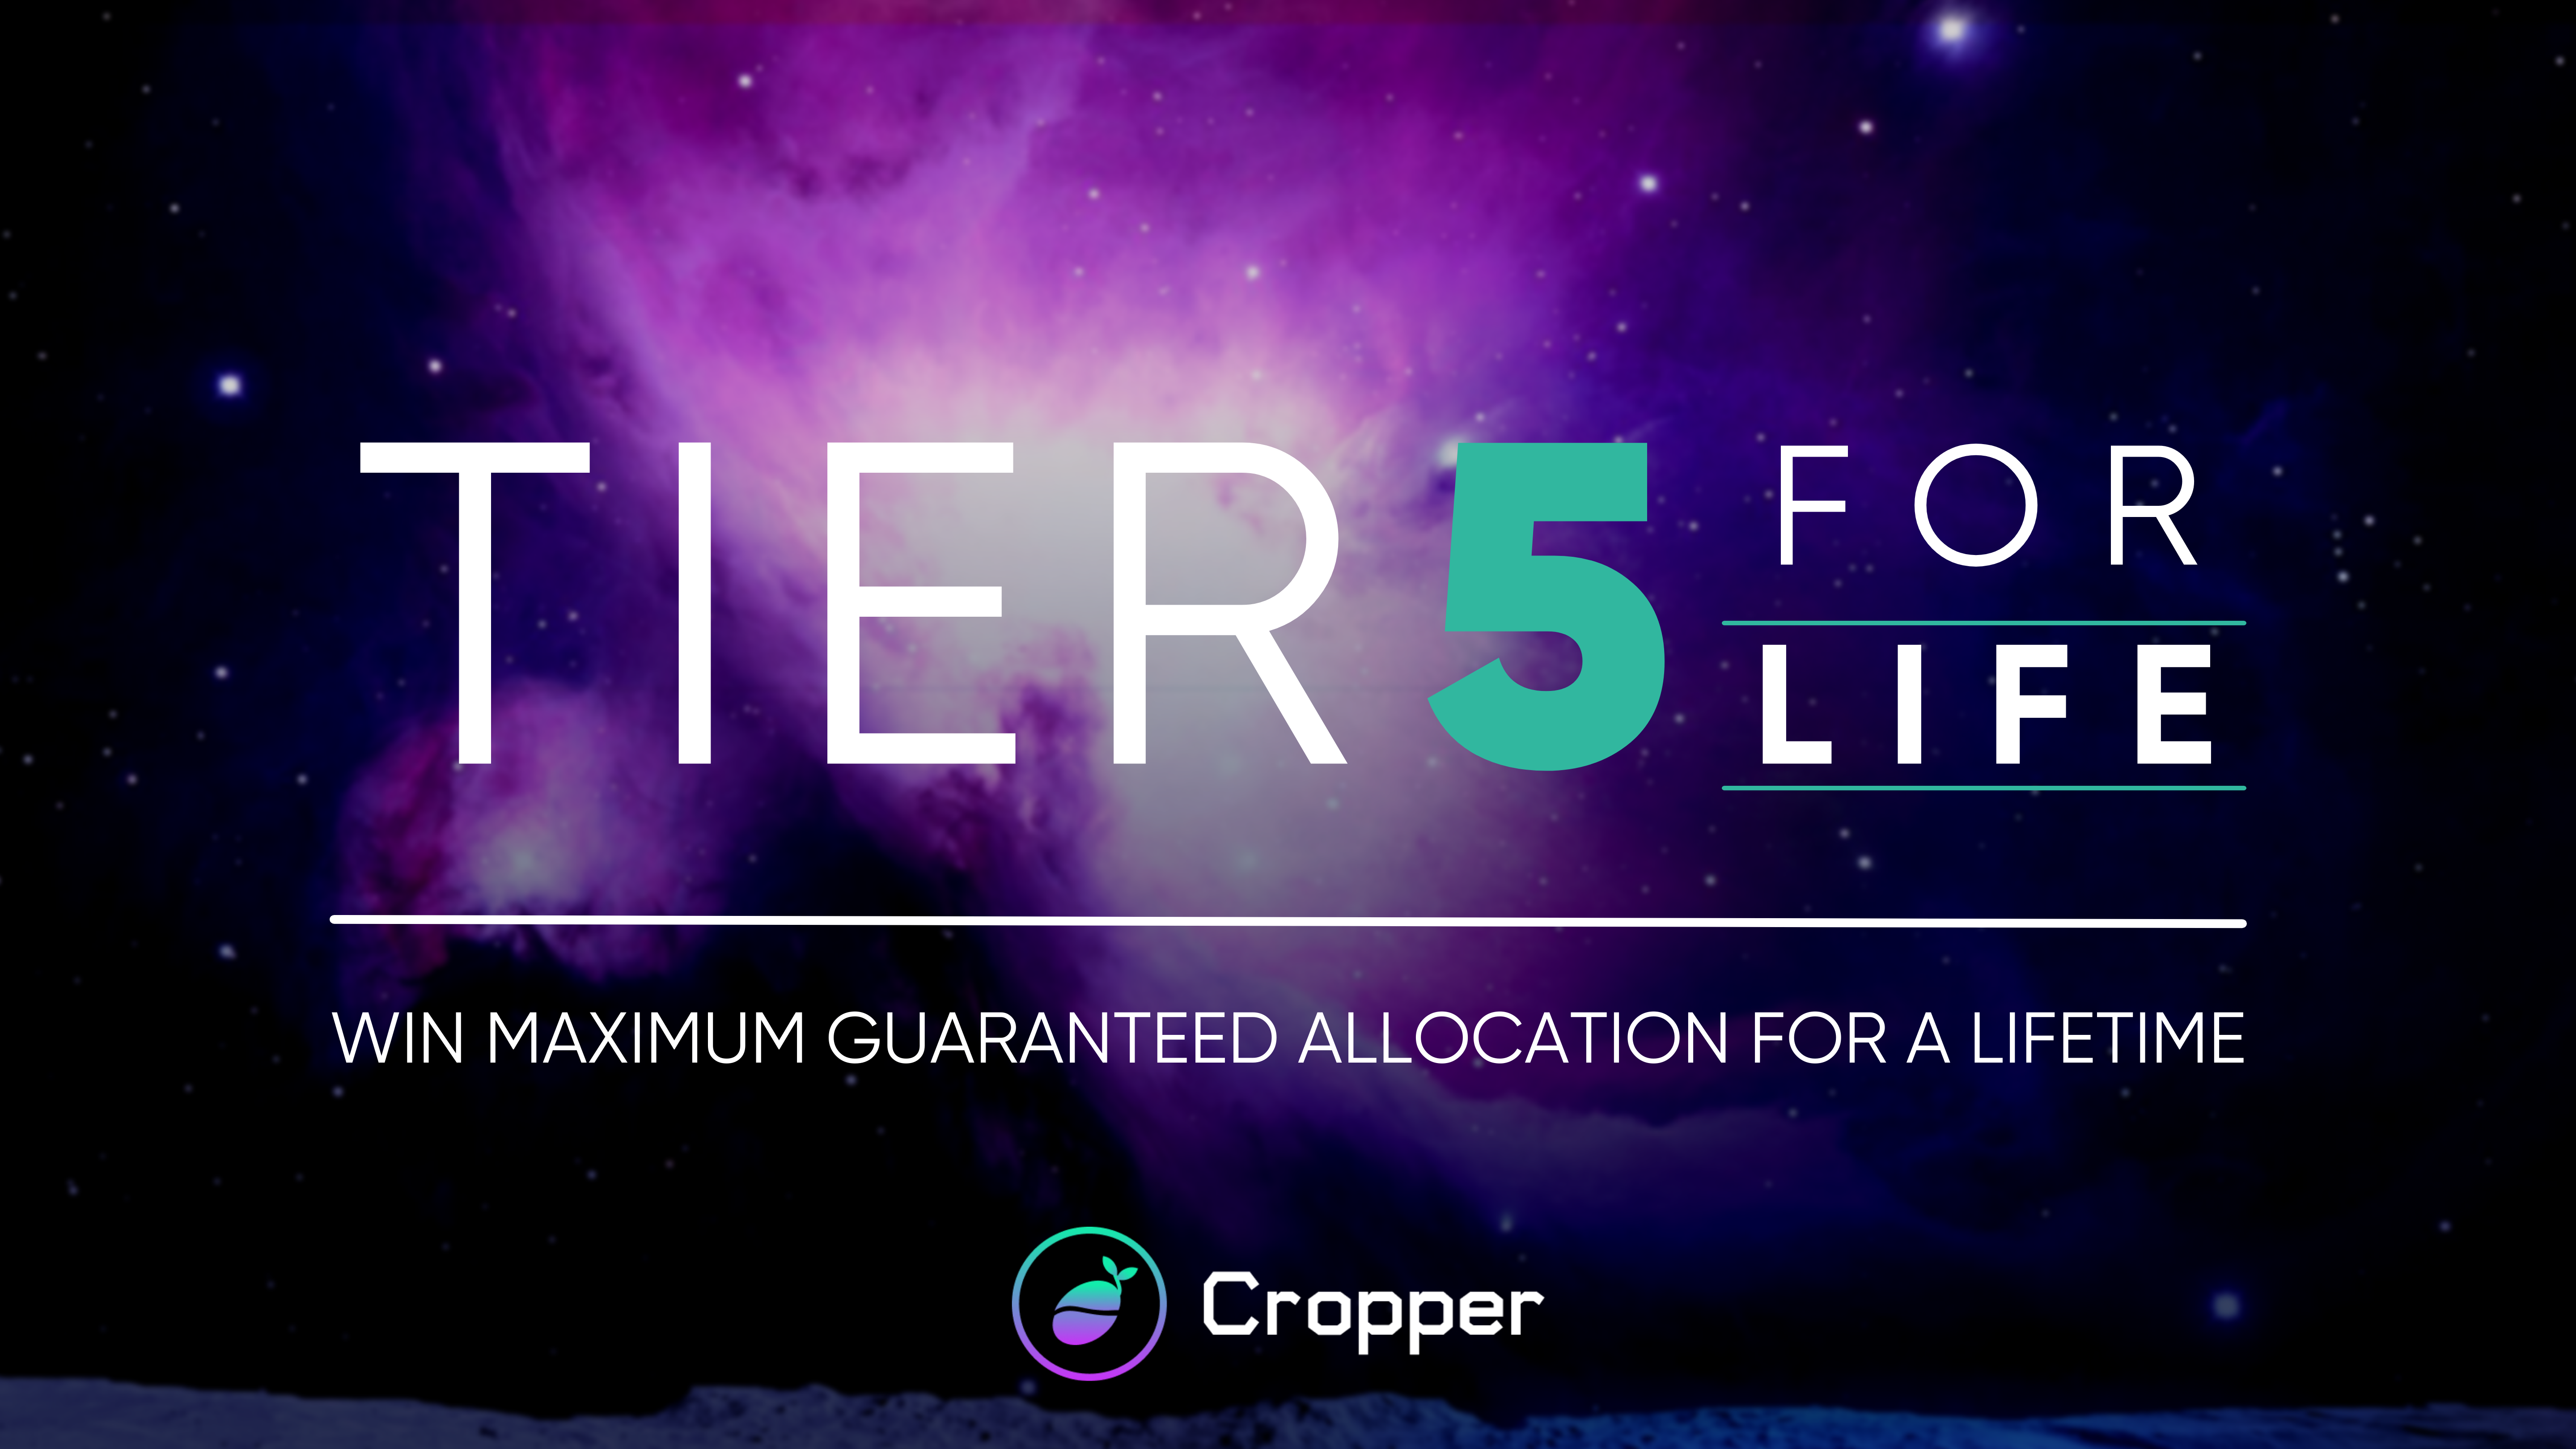 TIER 5 FOR LIFE: Cropper Kicks-Off New IDO Launchpad with Potentially Biggest Giveaway Ever On Solana